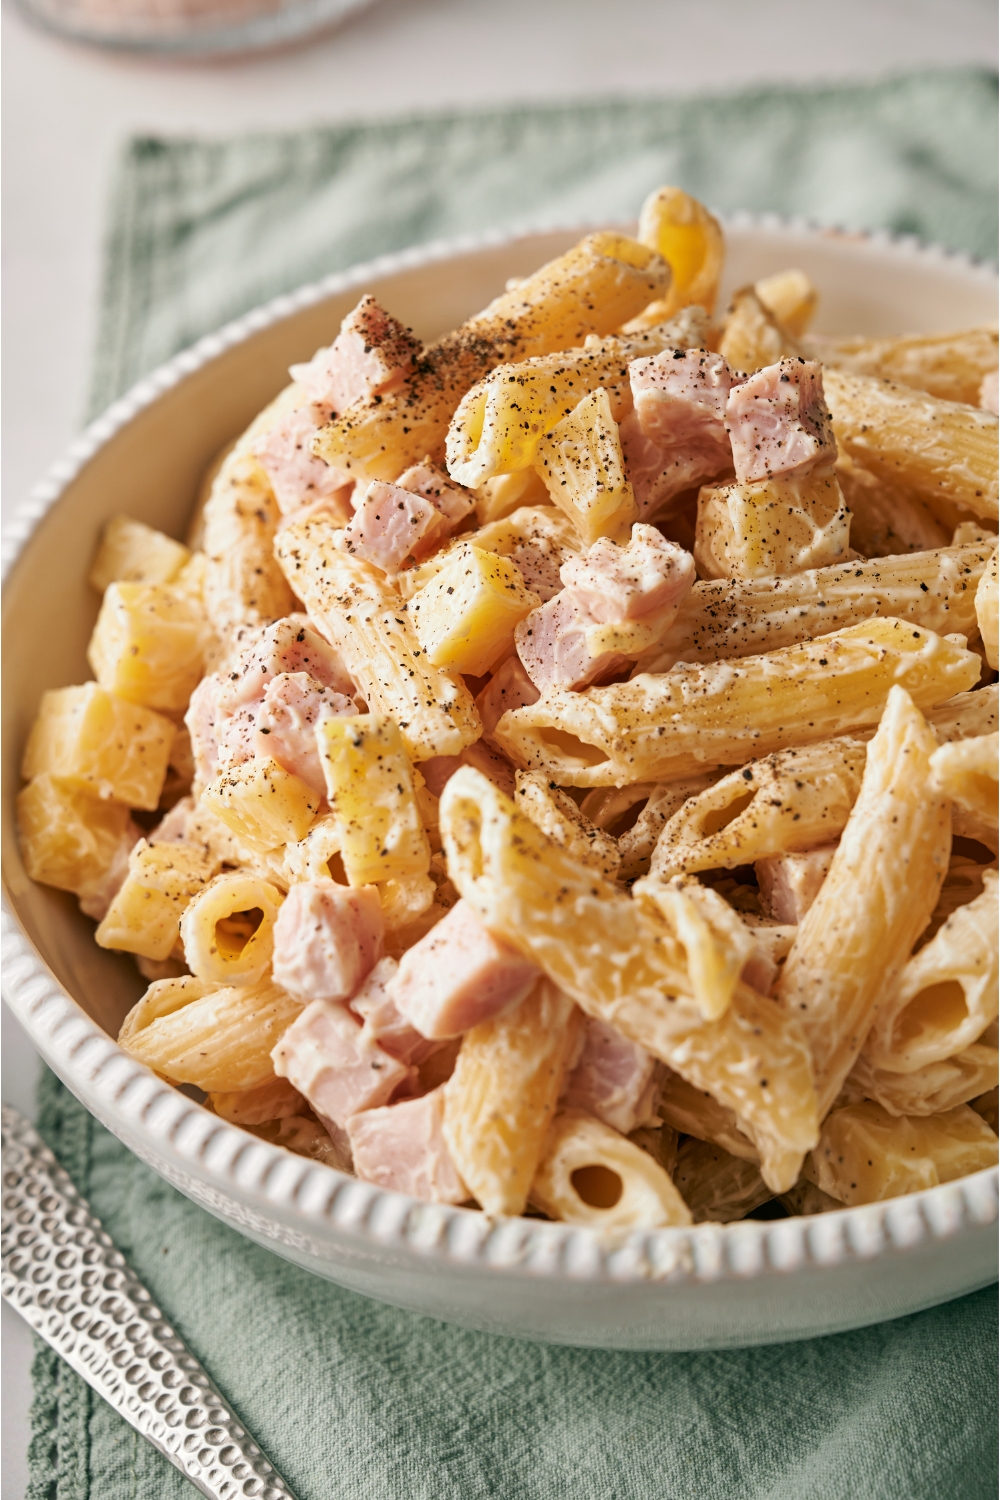 A white bowl filled with pasta salad, with penne pasta, cubed ham, cubed cheese, and black pepper, all tossed in a creamy dressing.